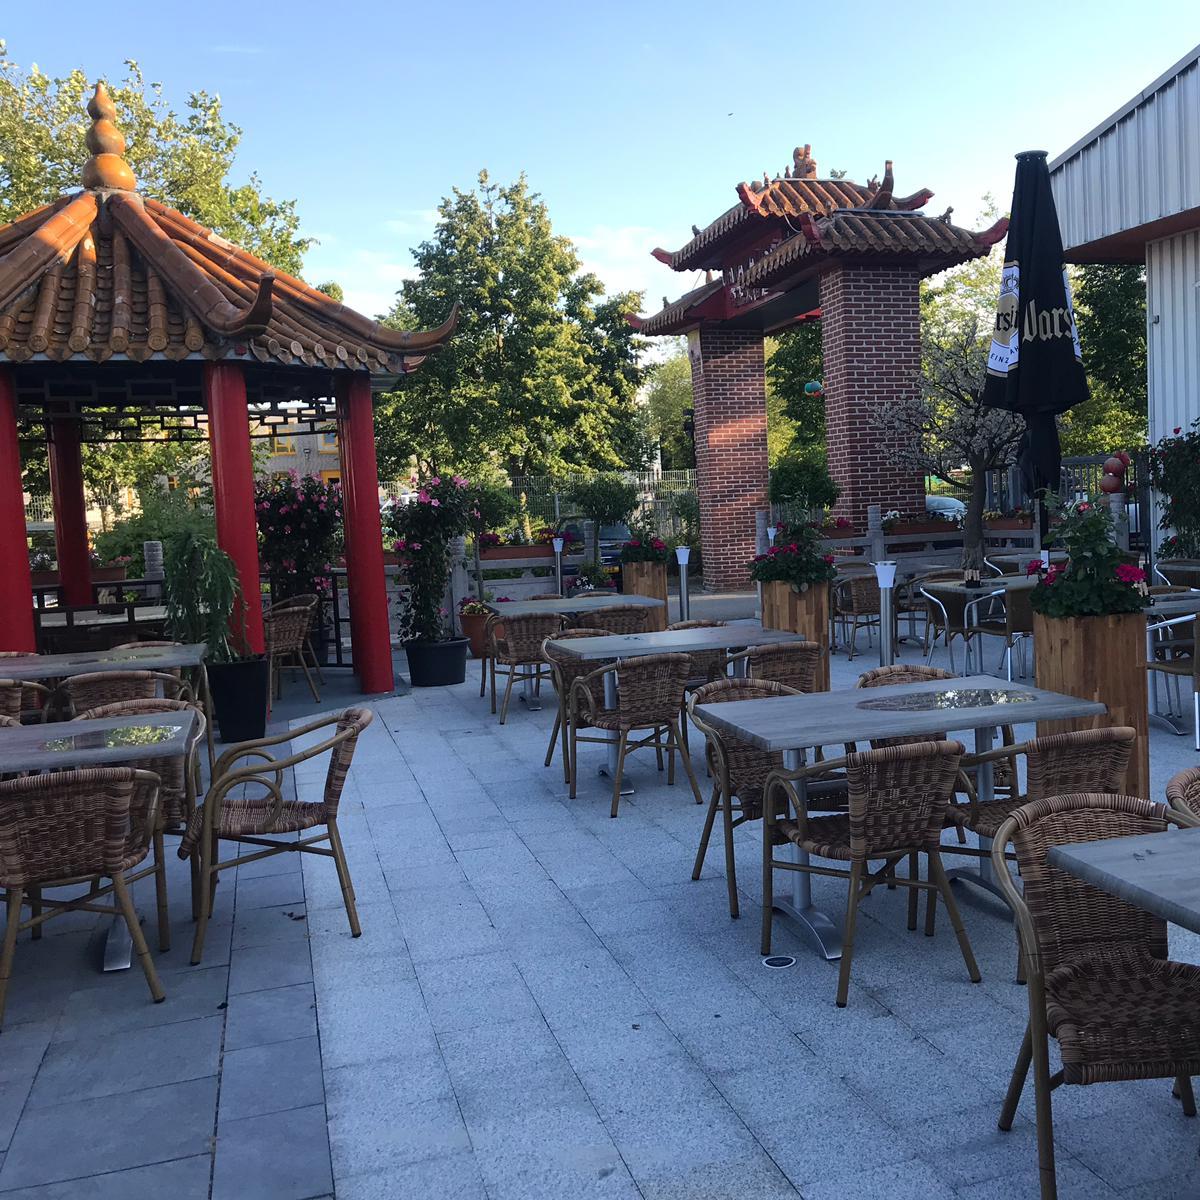 Restaurant "China-Palast" in Kleve